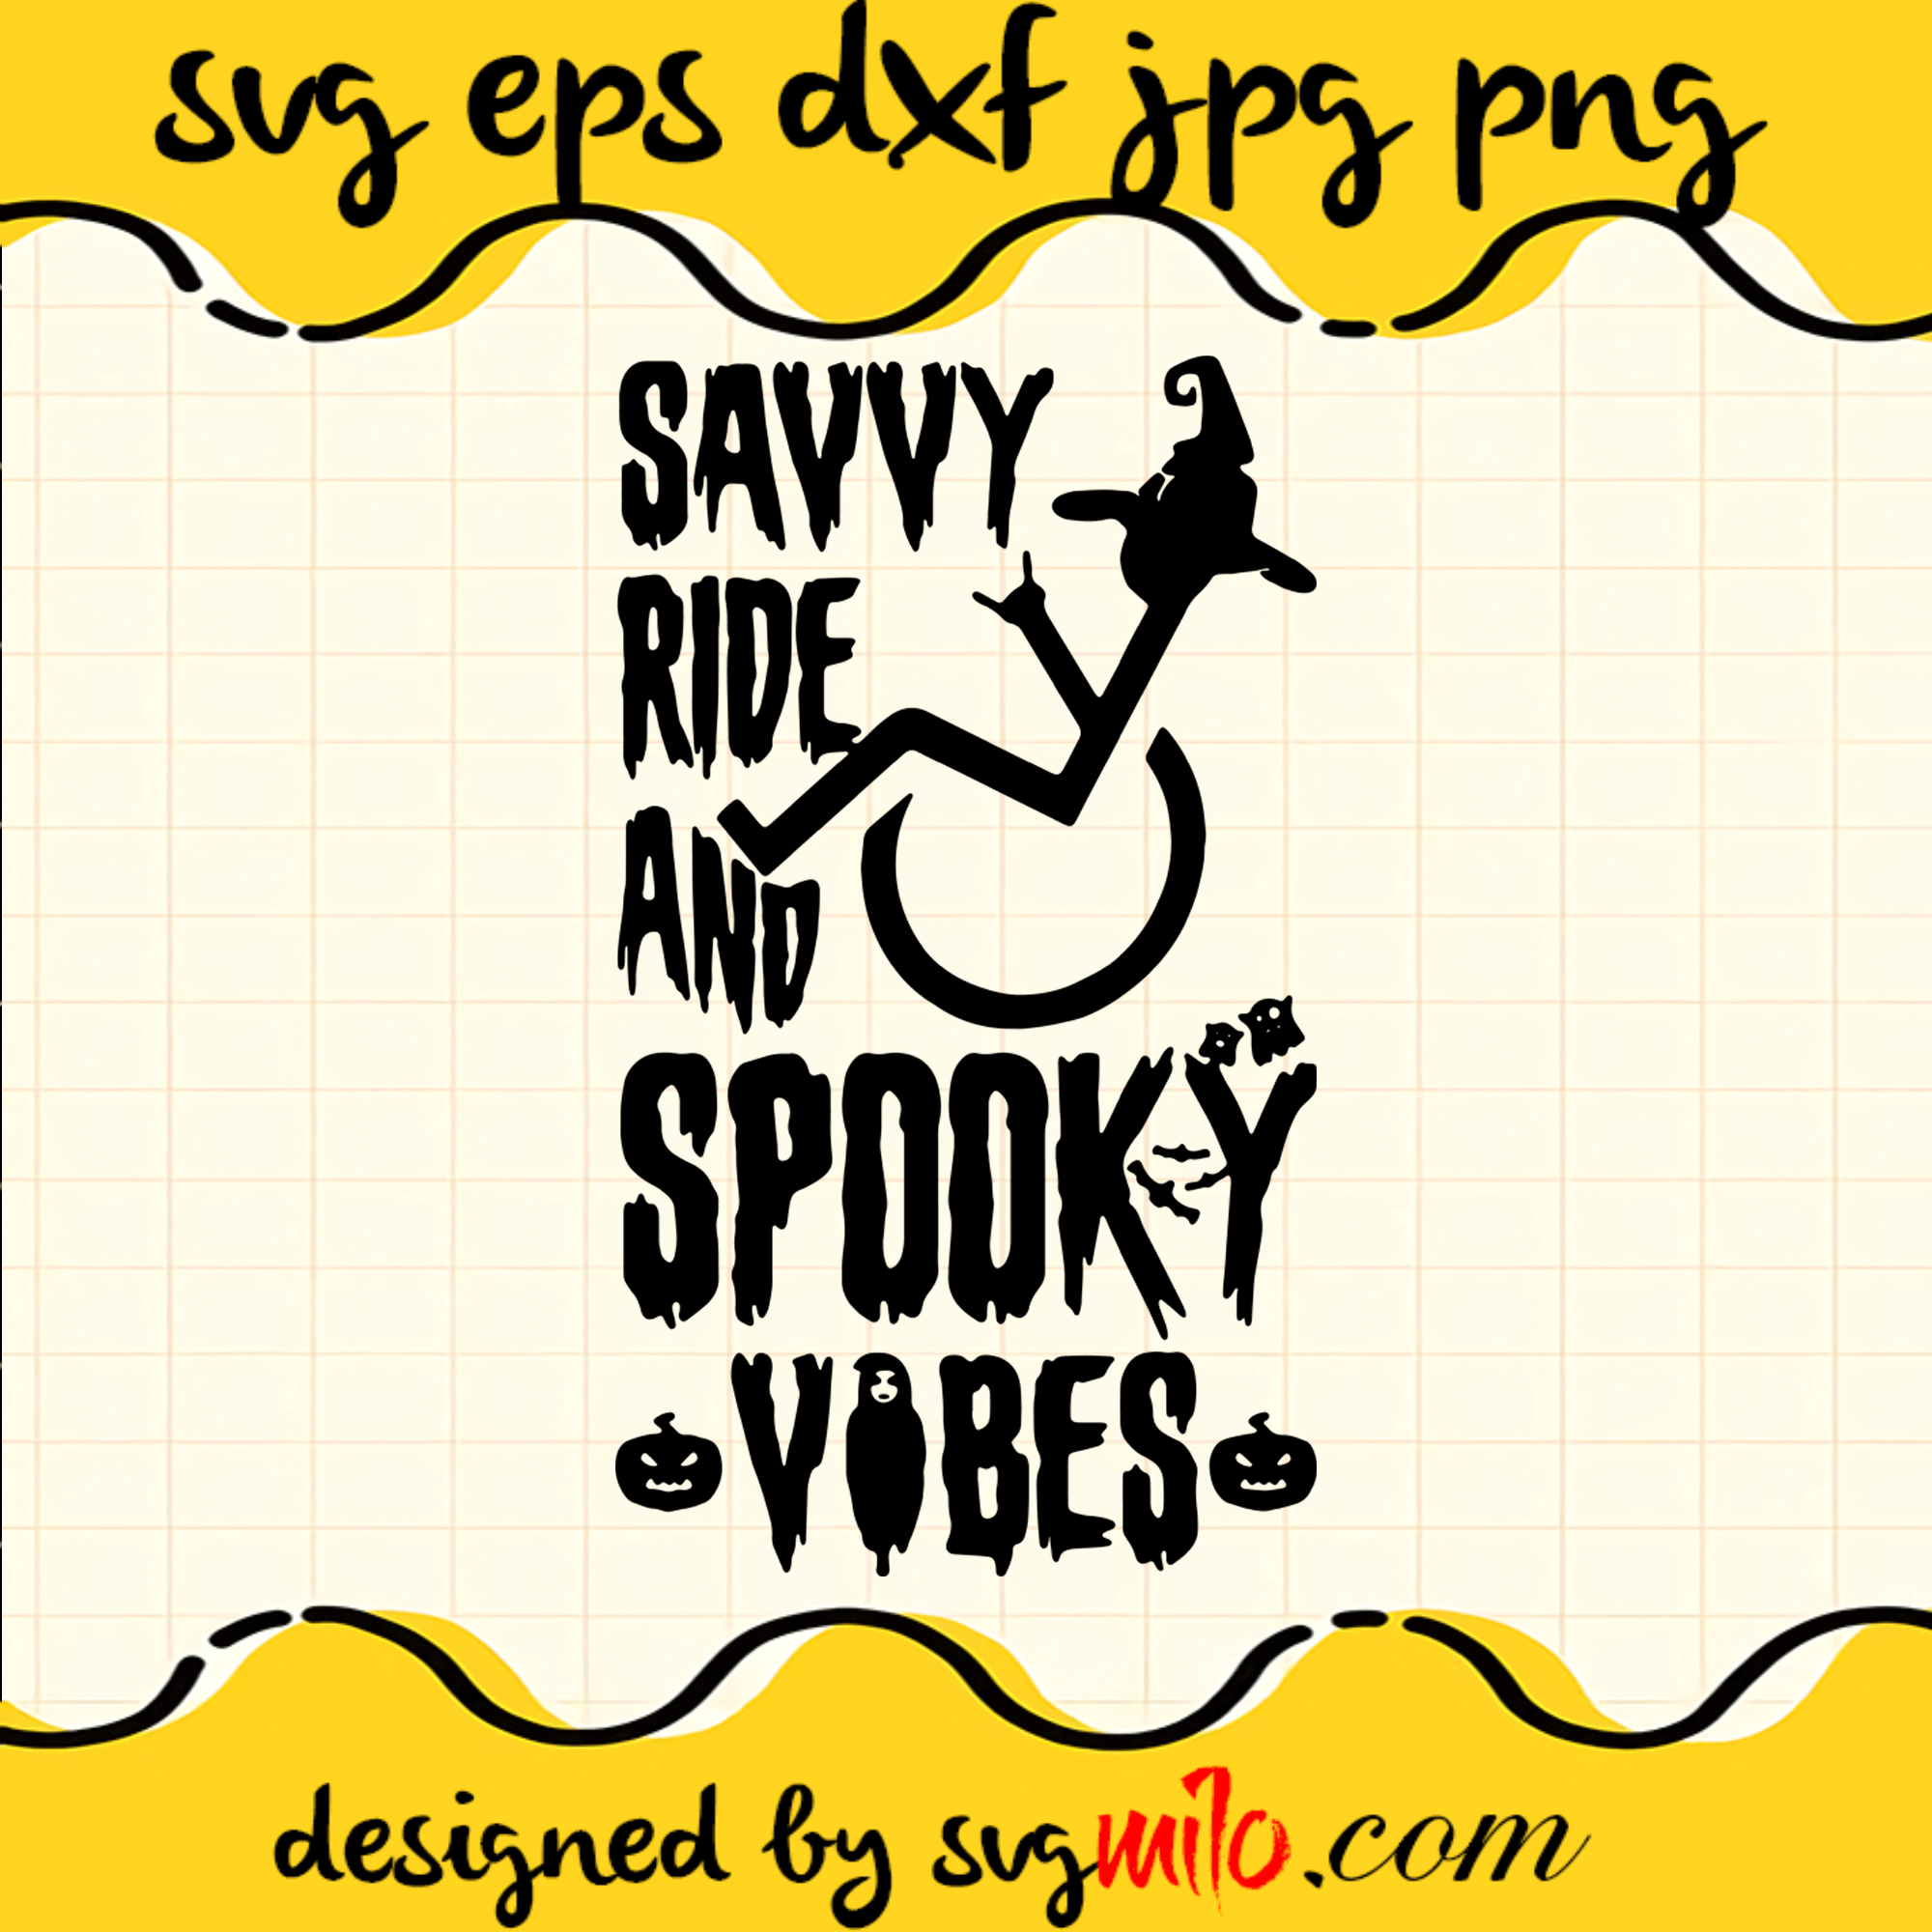 Savvy Ride And Spooky Vibes Cricut cut file, Silhouette cutting file,Premium Quality SVG - SVGMILO